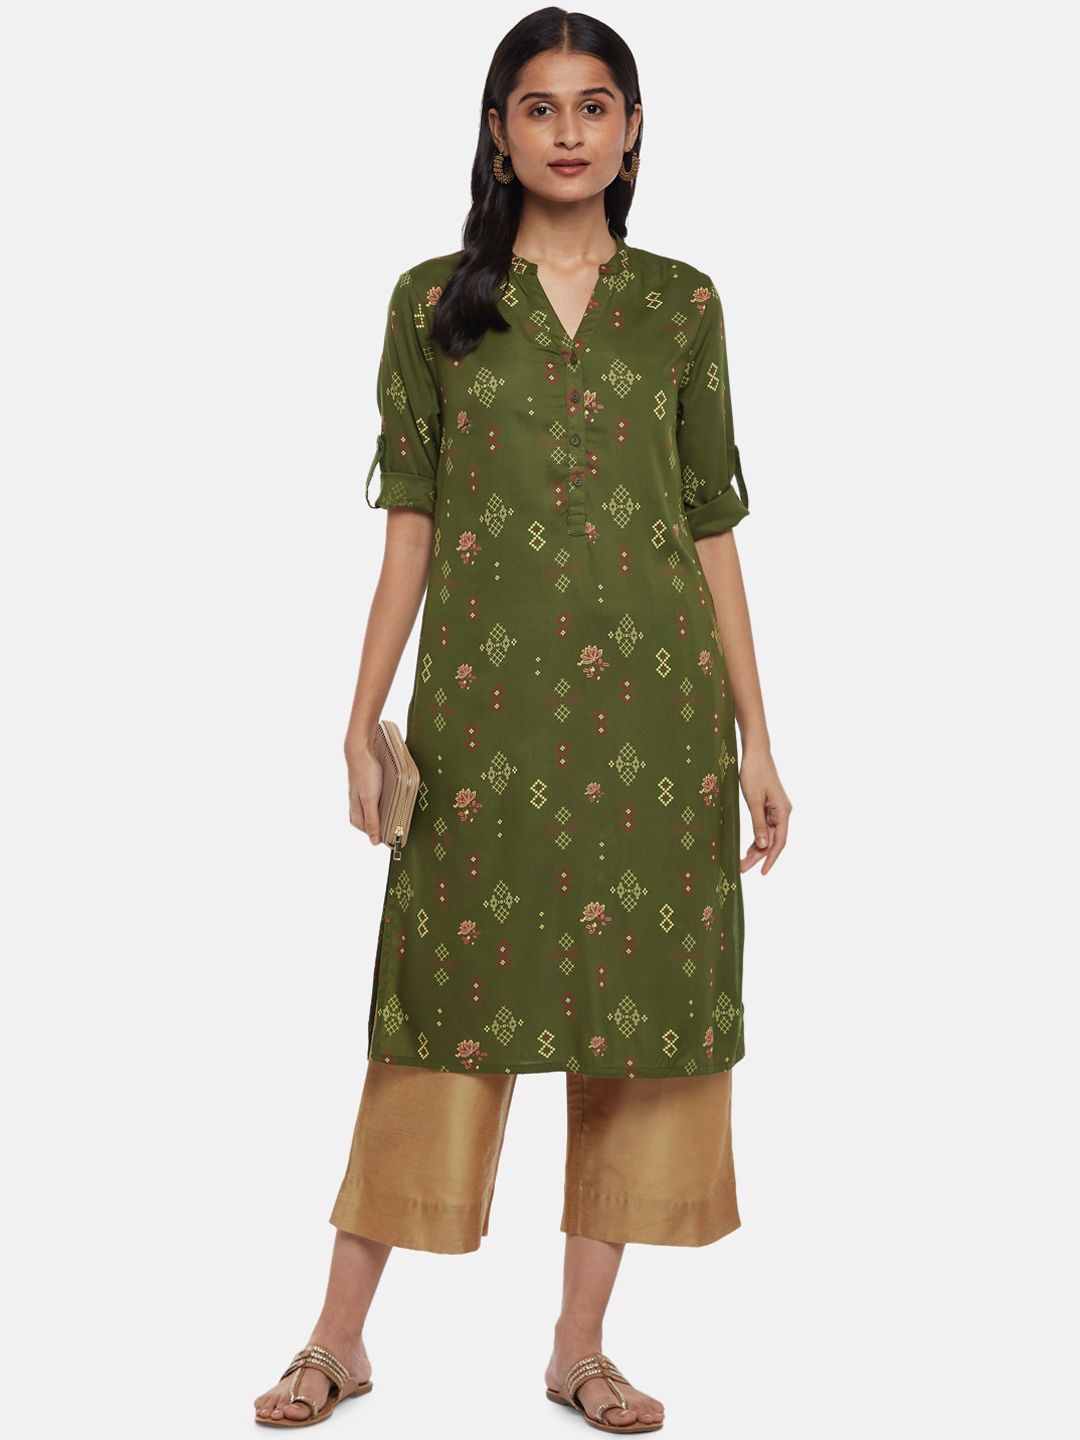 RANGMANCH BY PANTALOONS Women Olive Green Floral Printed Thread Work Kurta Price in India